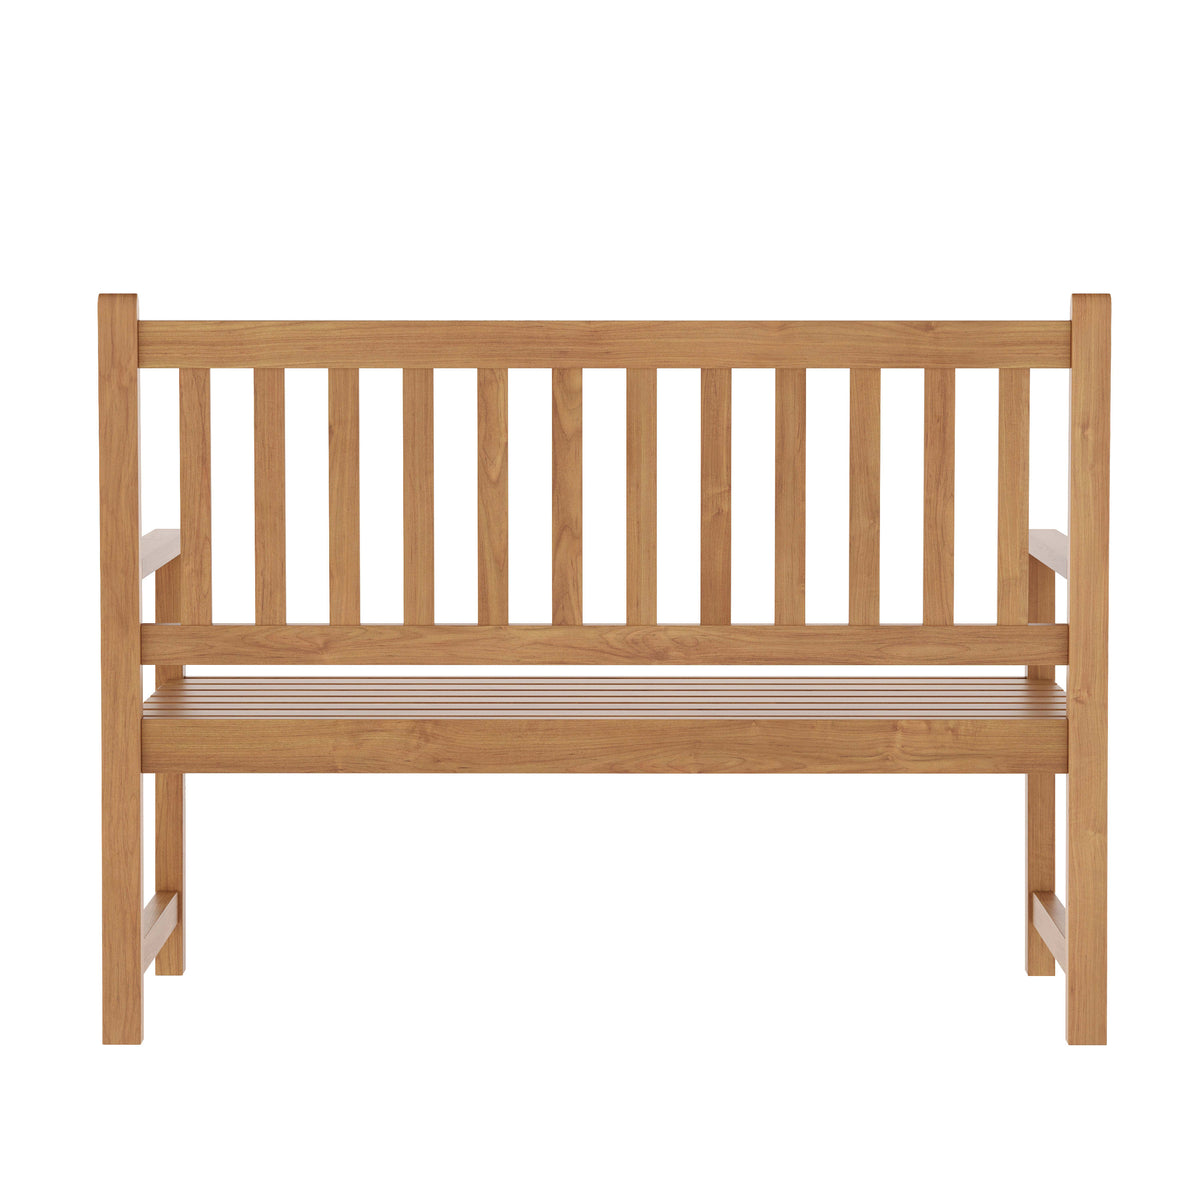 Brown |#| Commercial Indoor/Outdoor 2-Person Patio Acacia Wood Bench Loveseat in Brown